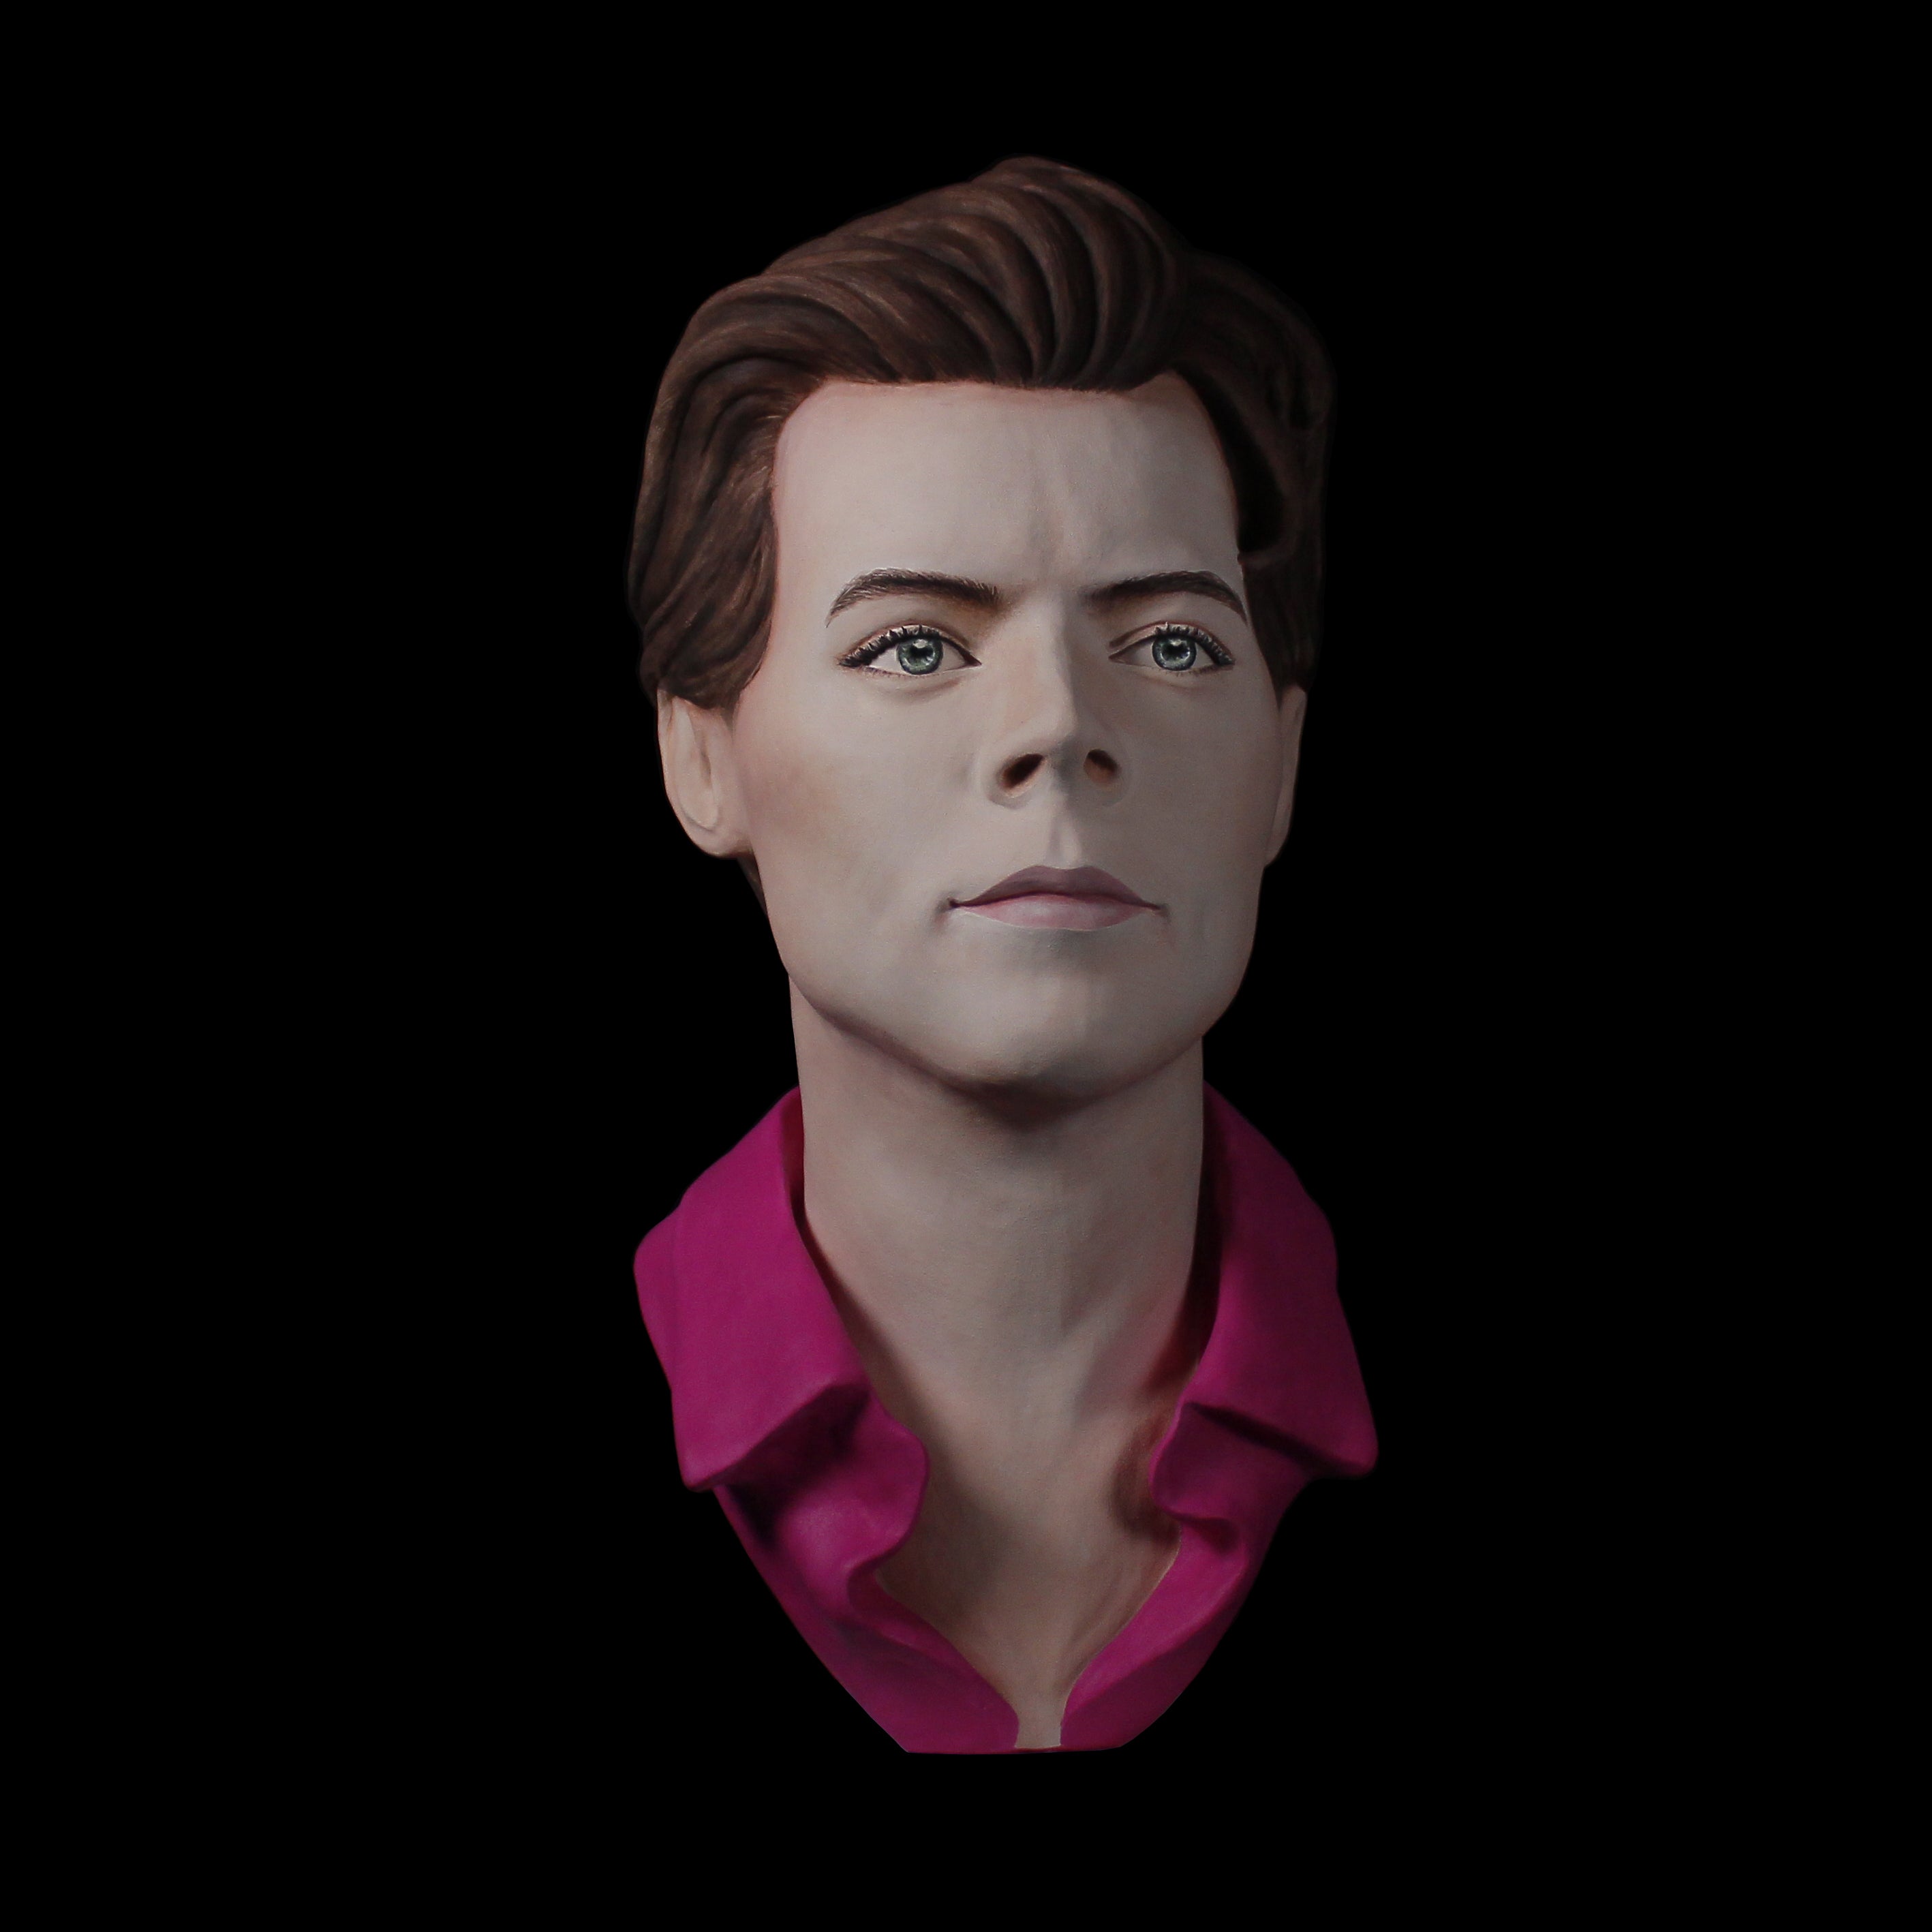 Harry Styles portrait sculpture bust made of painted ceramic by Maria Primolan Sculptor